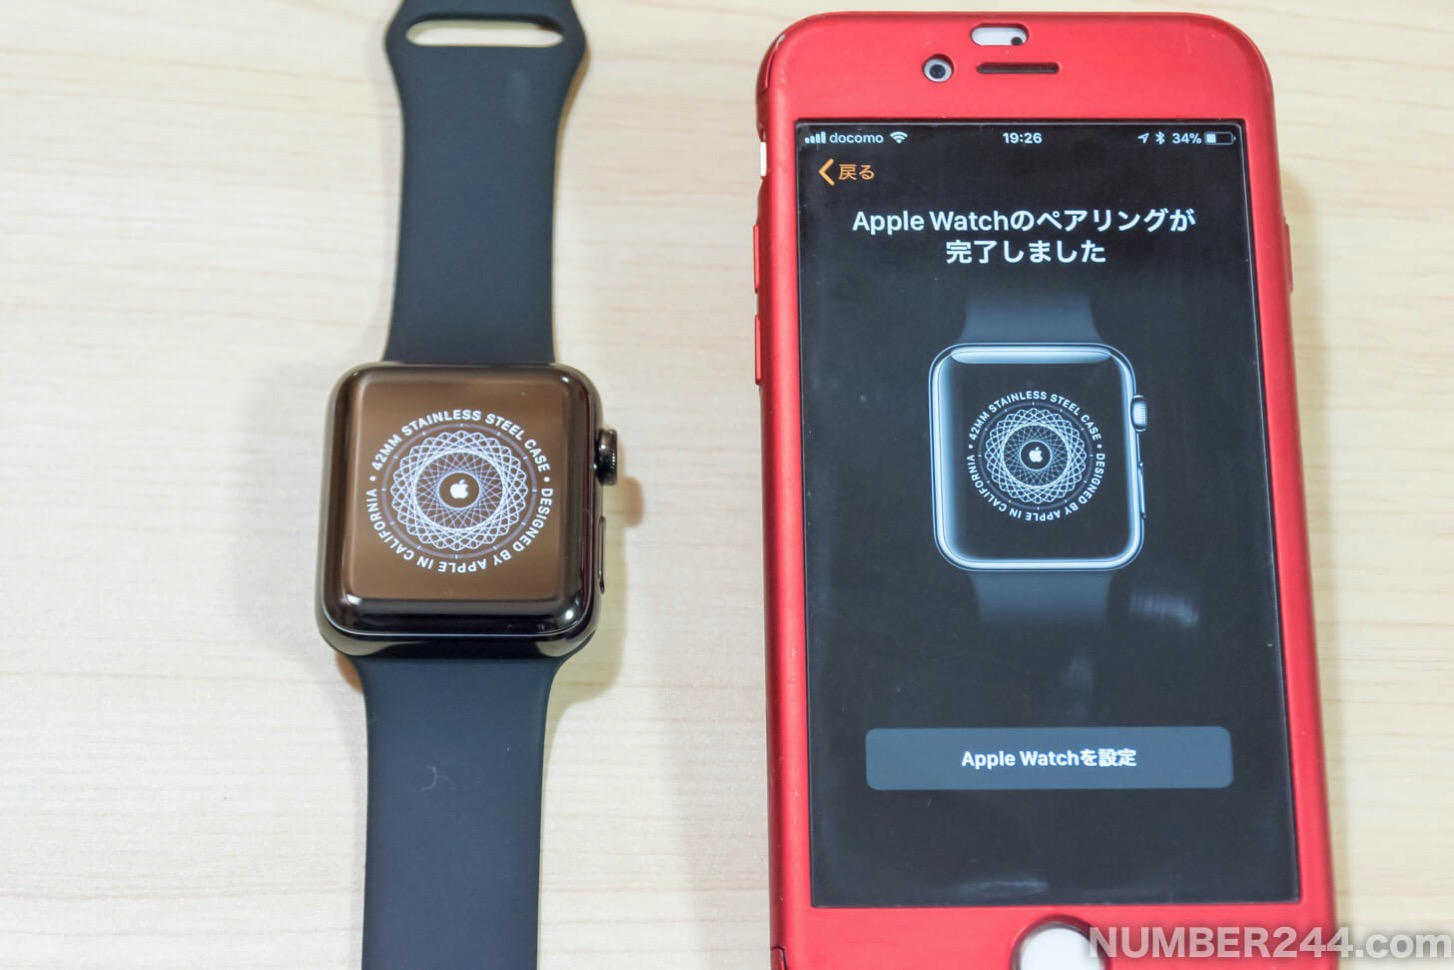 Initial setting of Apple Watch 5